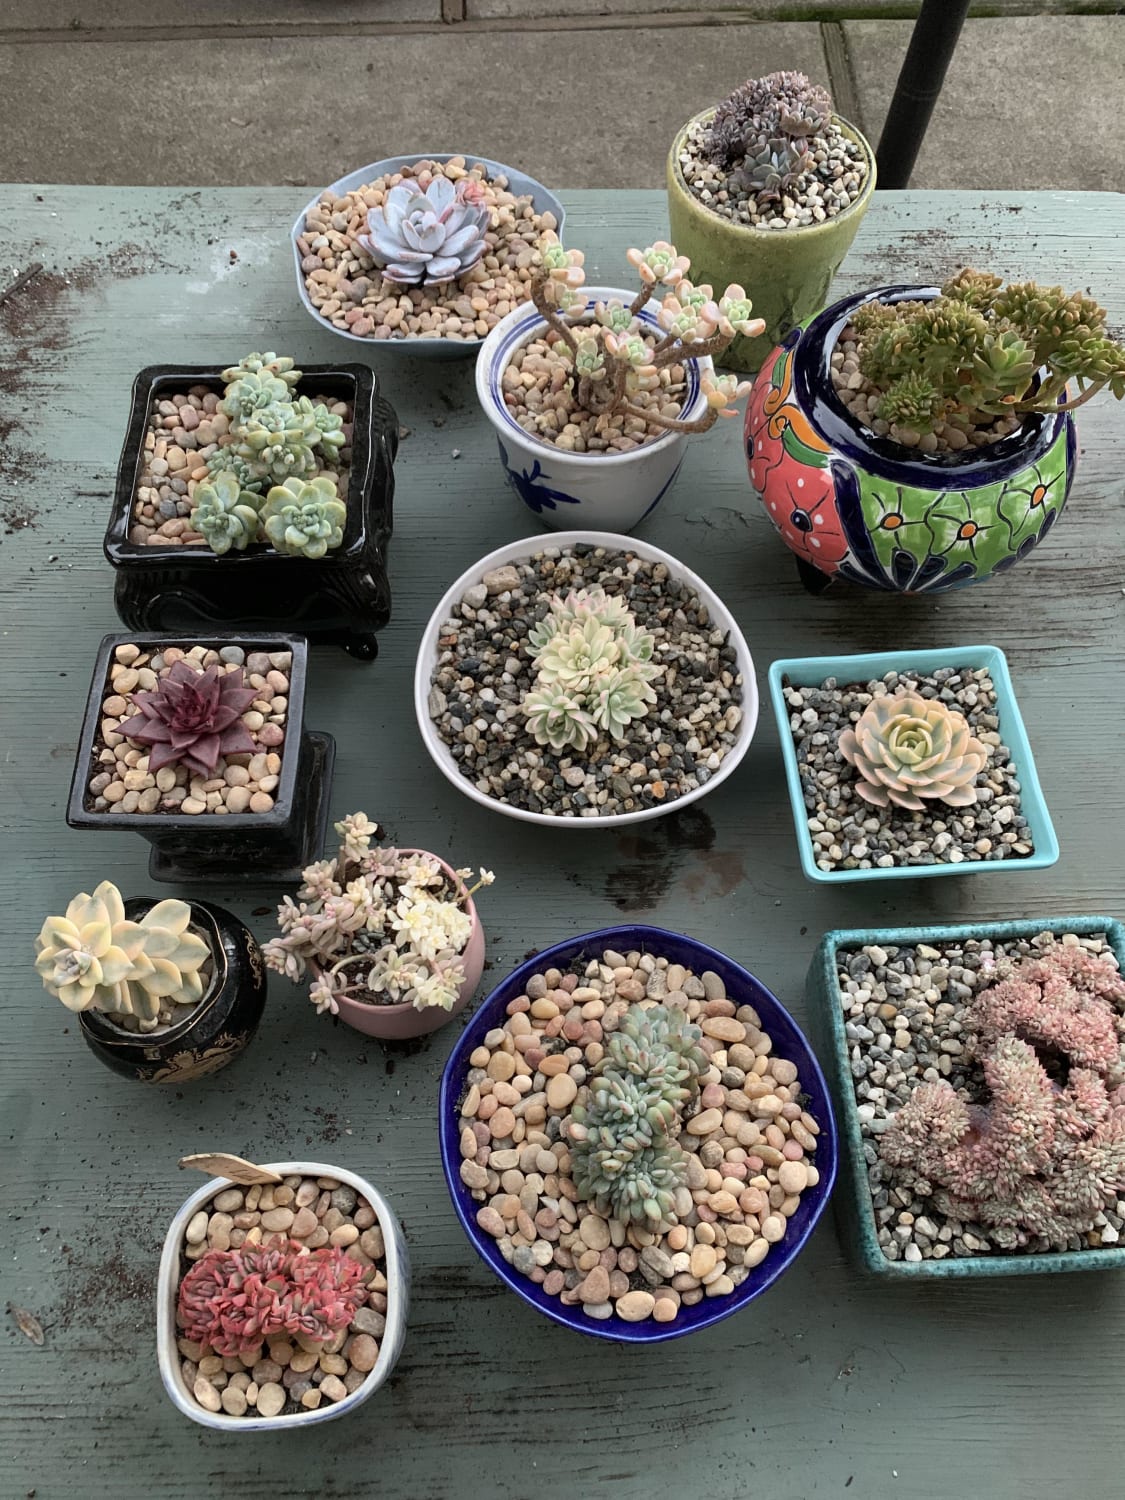 Went a bit spend crazy when we found a local seller of Korean succulents... here’s the haul!